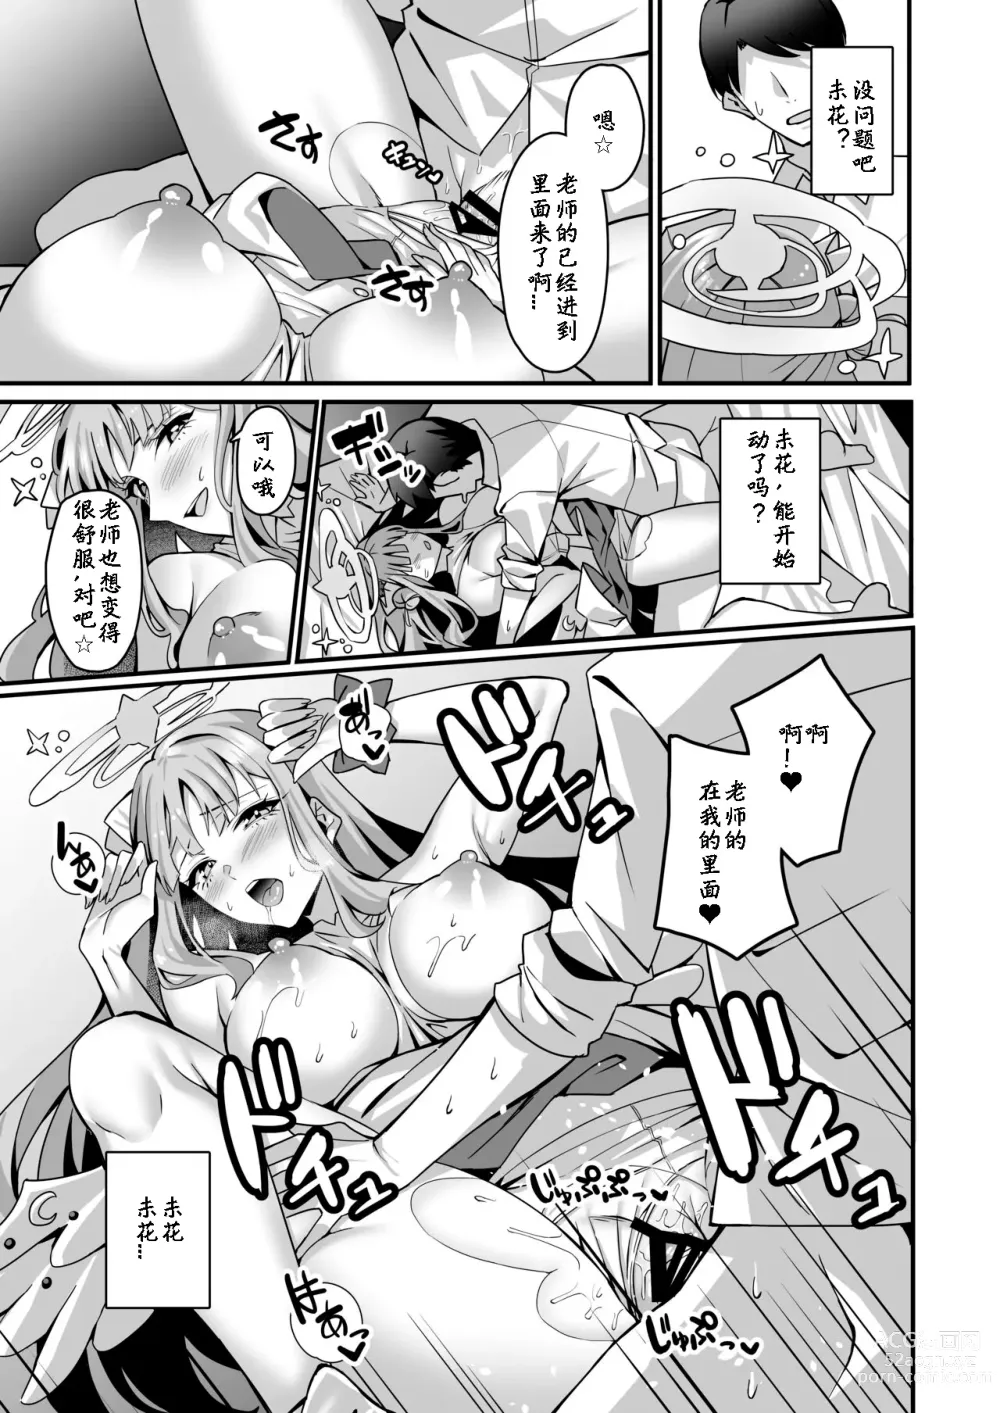 Page 10 of doujinshi Mika to Happy Love Love Sex Shite Haramaseru Hon - A book about happy loving sex with Mika and impregnation.